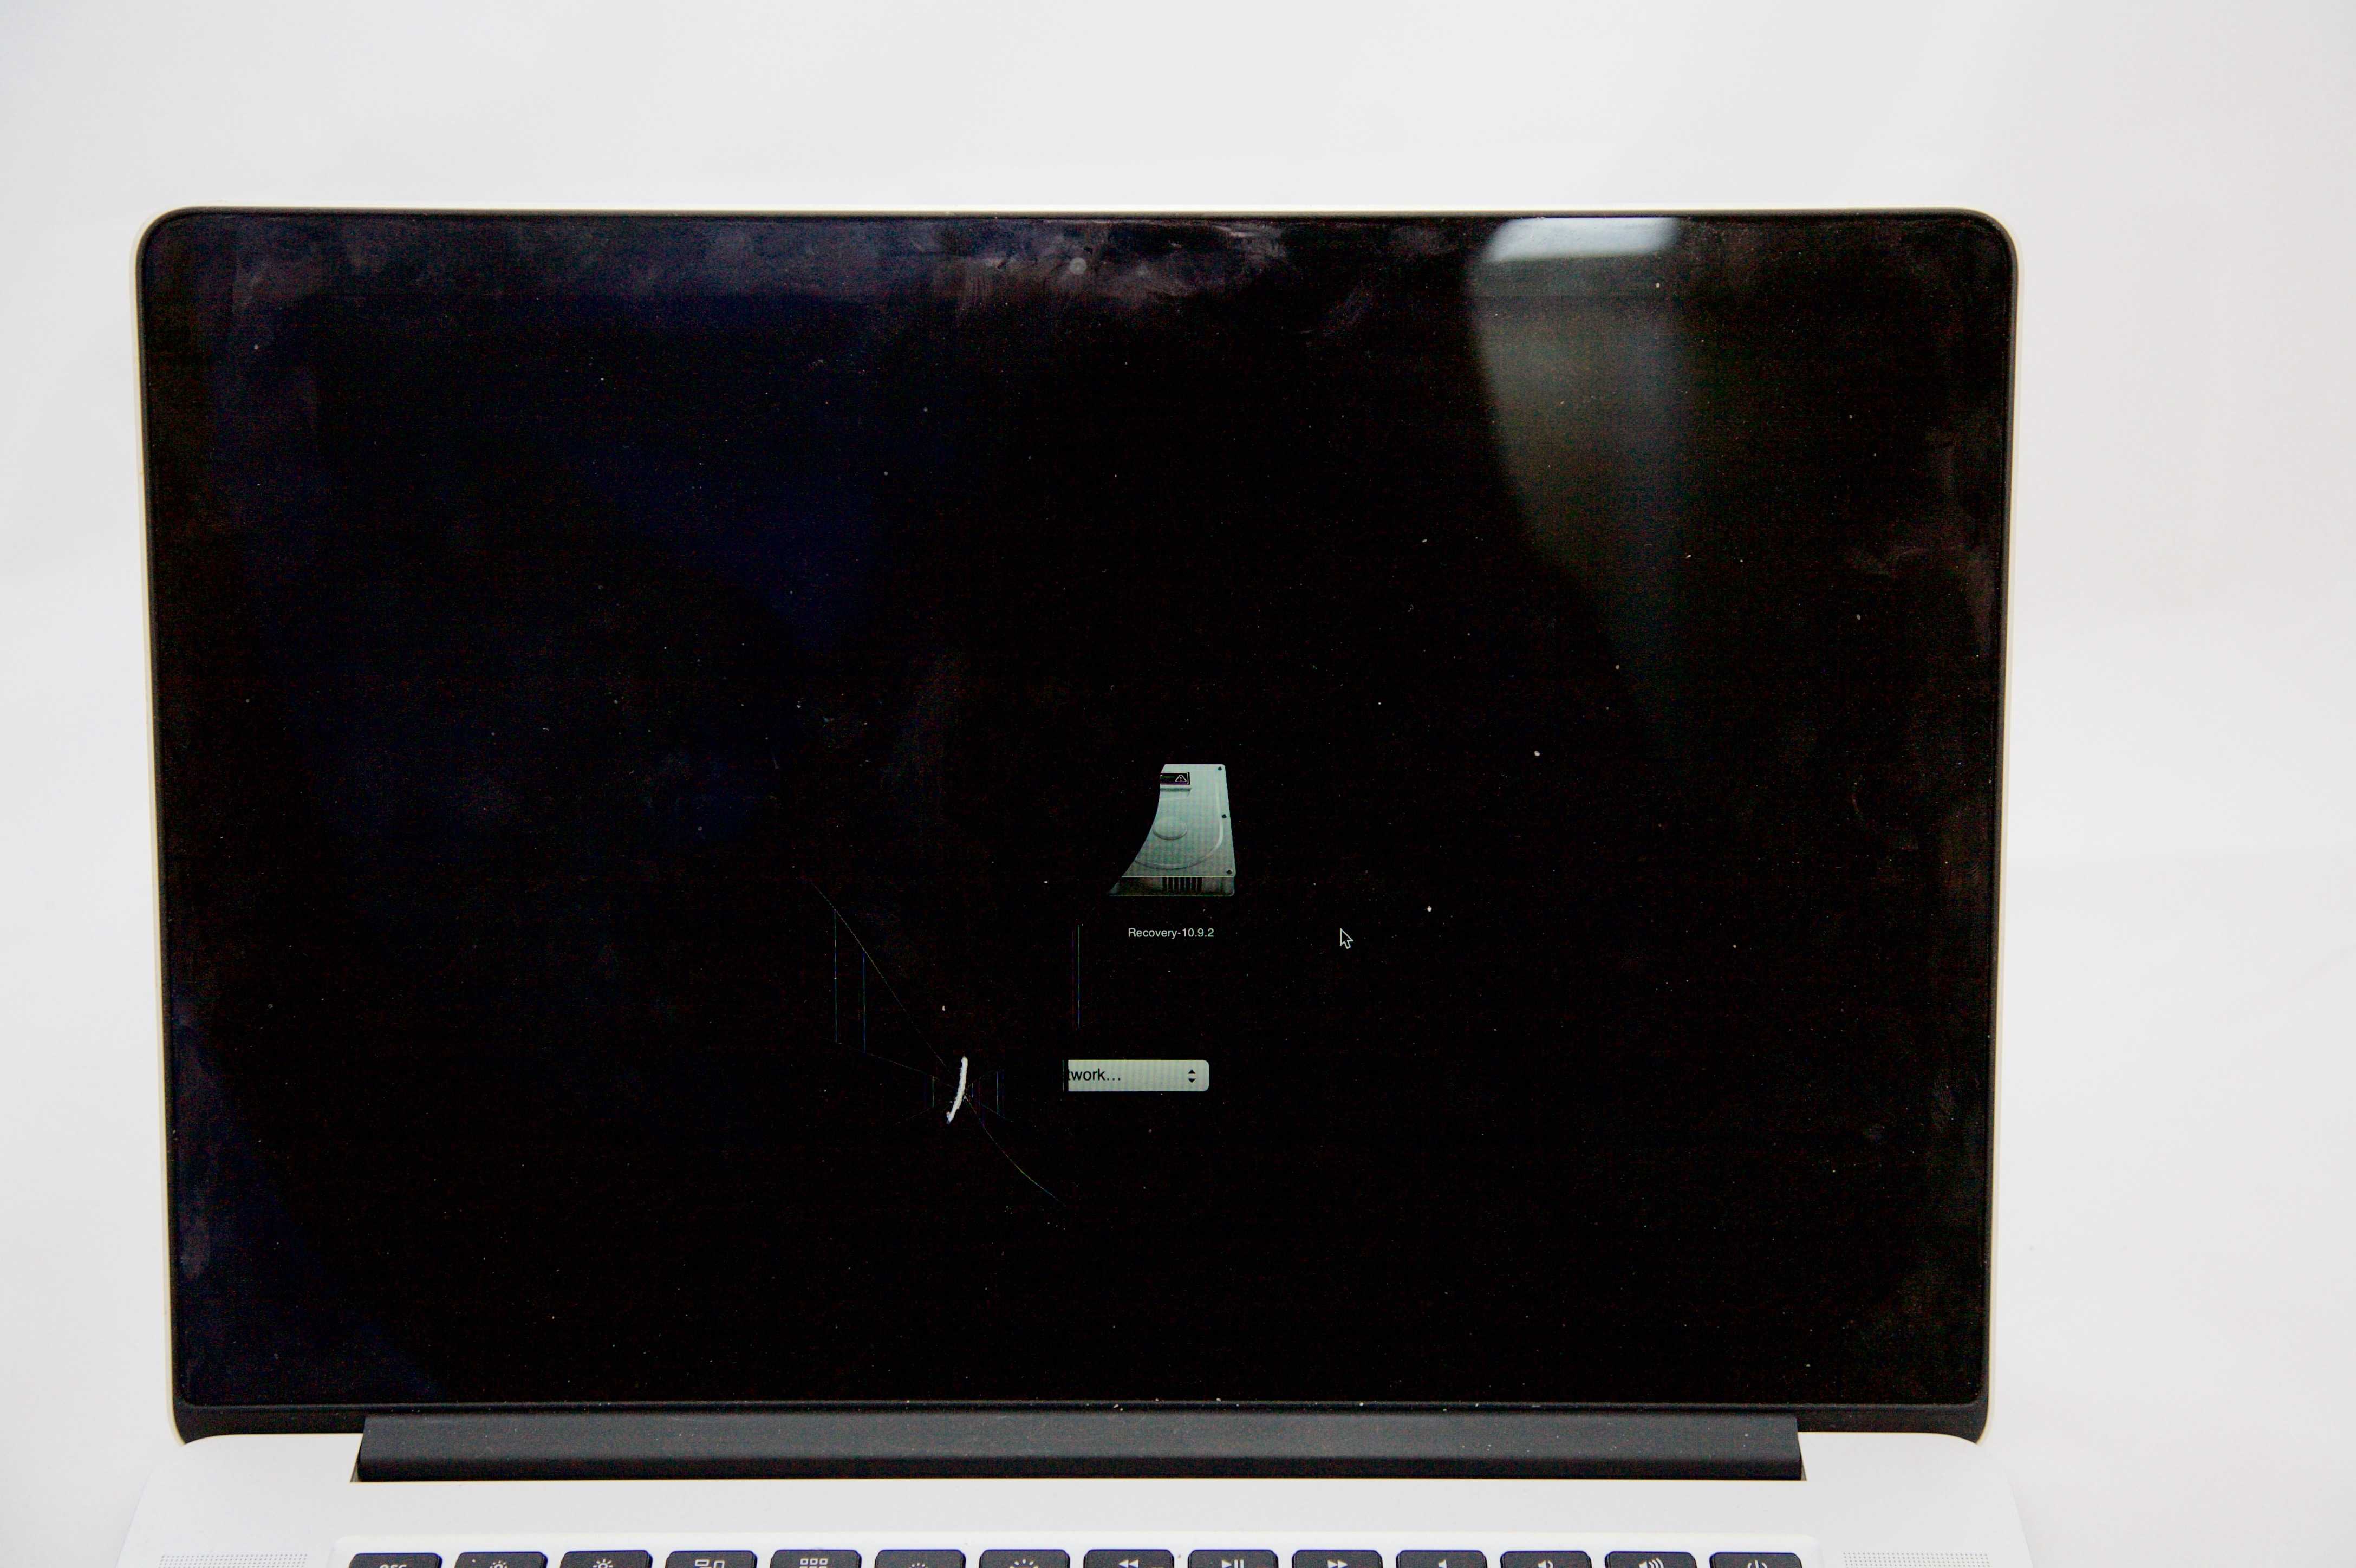 MacBook Pro Retina with half of the startup drive visible. The other half is blacked out by the crack on the screen